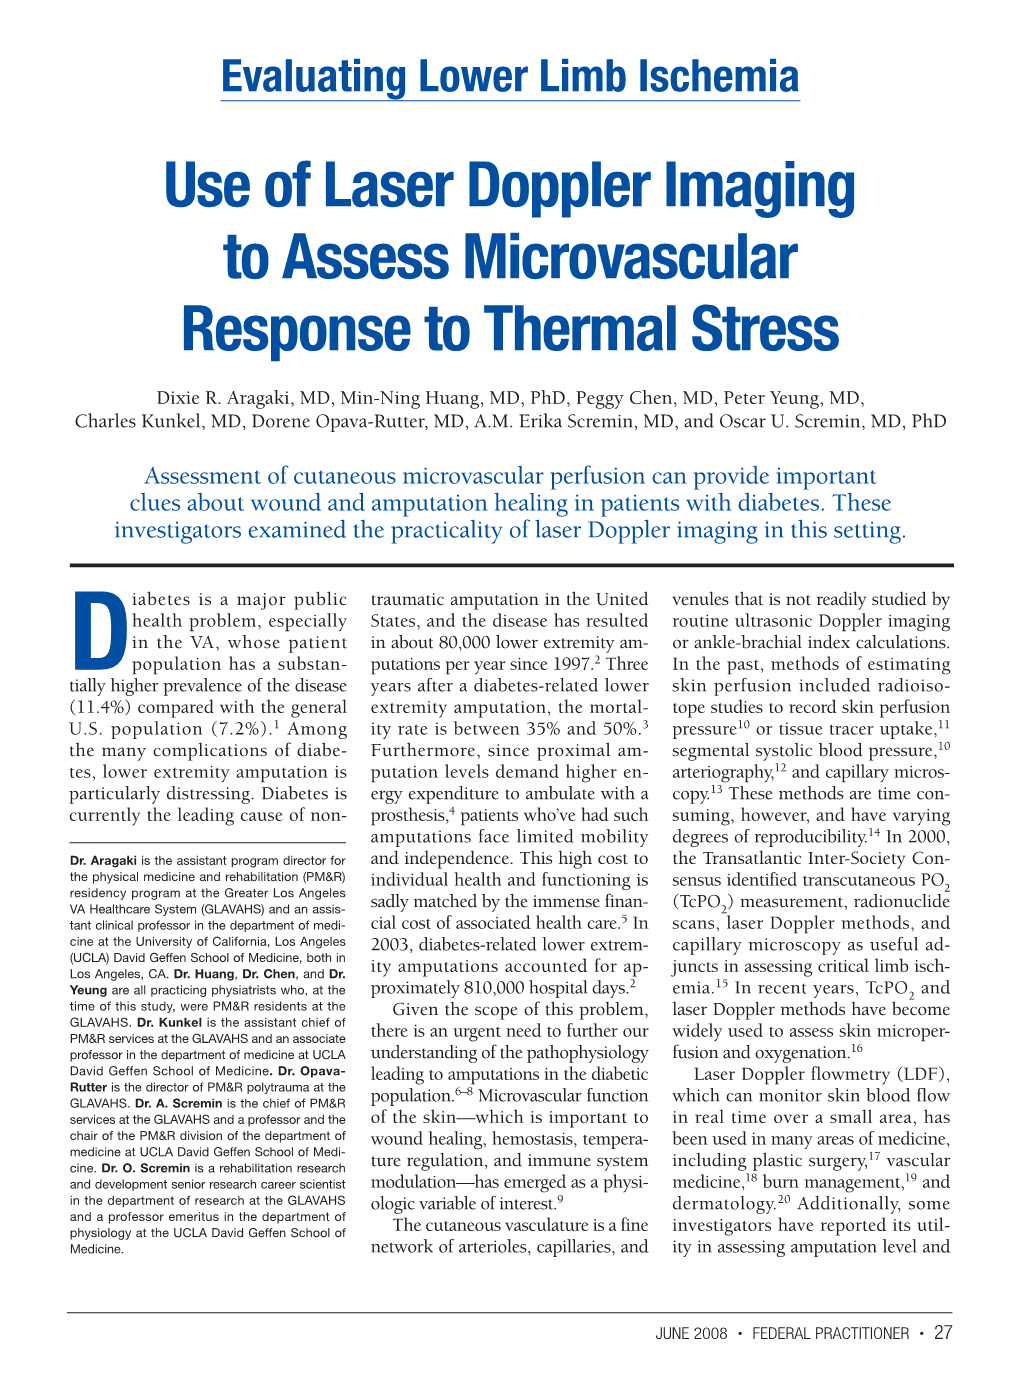 Use of Laser Doppler Imaging to Assess Microvascular Response to Thermal Stress